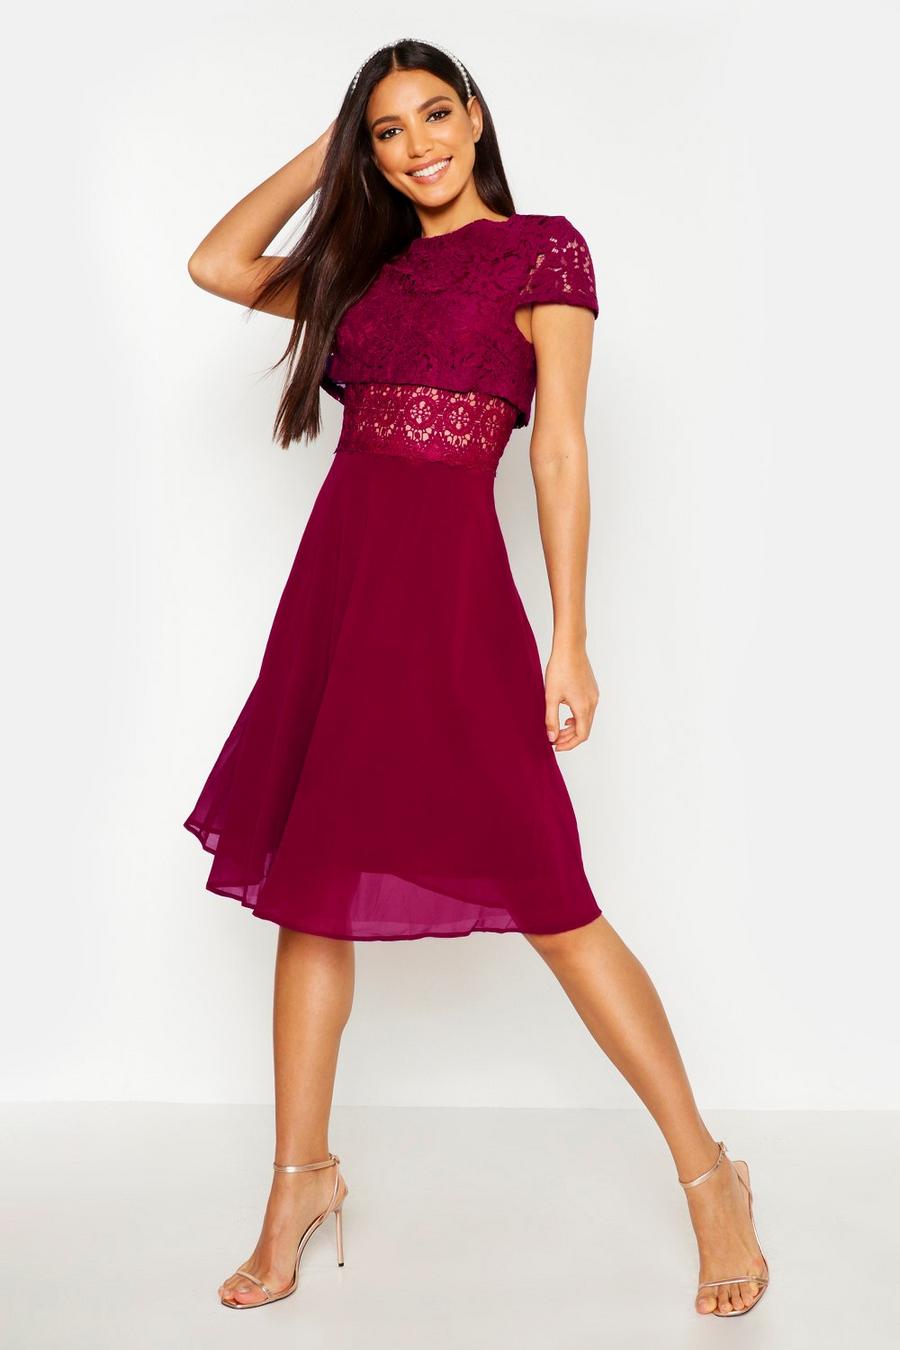 Berry red Lace Top Chiffon Skater Dress